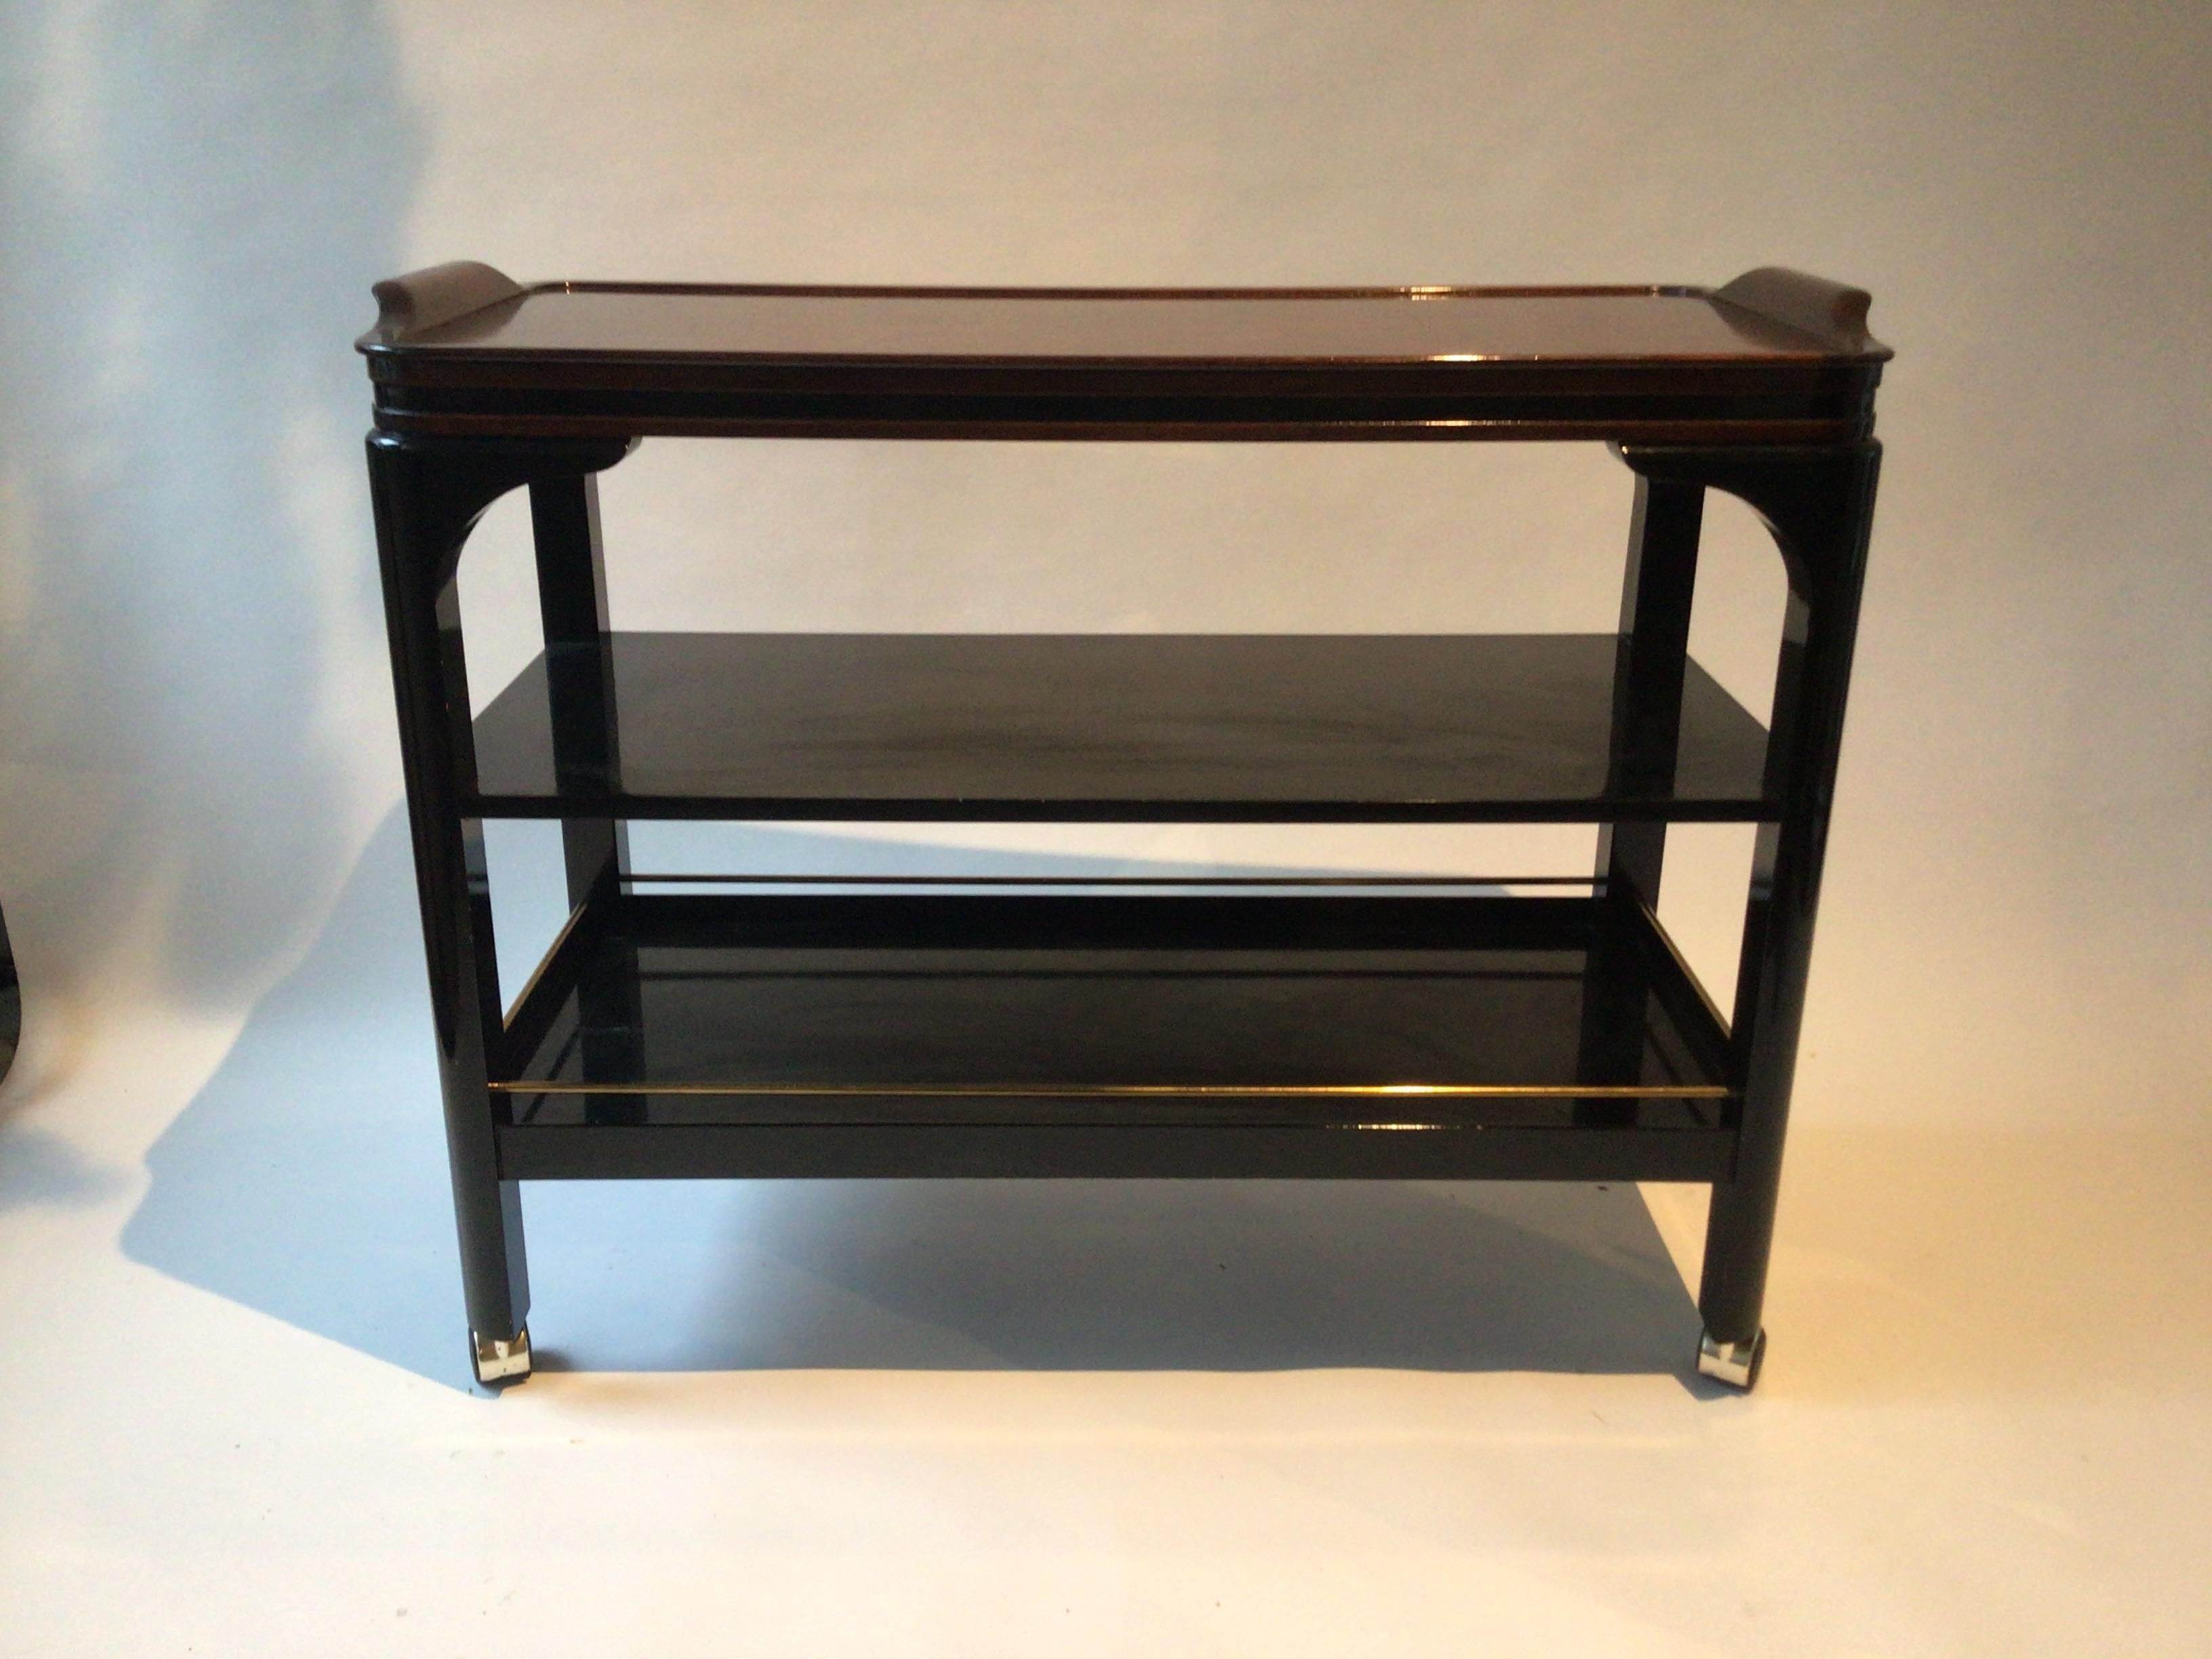 1980s Custom made bar cart on casters. From a NYC penthouse apartment. Original cost was 5000 dollars. Rosewood top, black lacquered shelves. Brass railing.